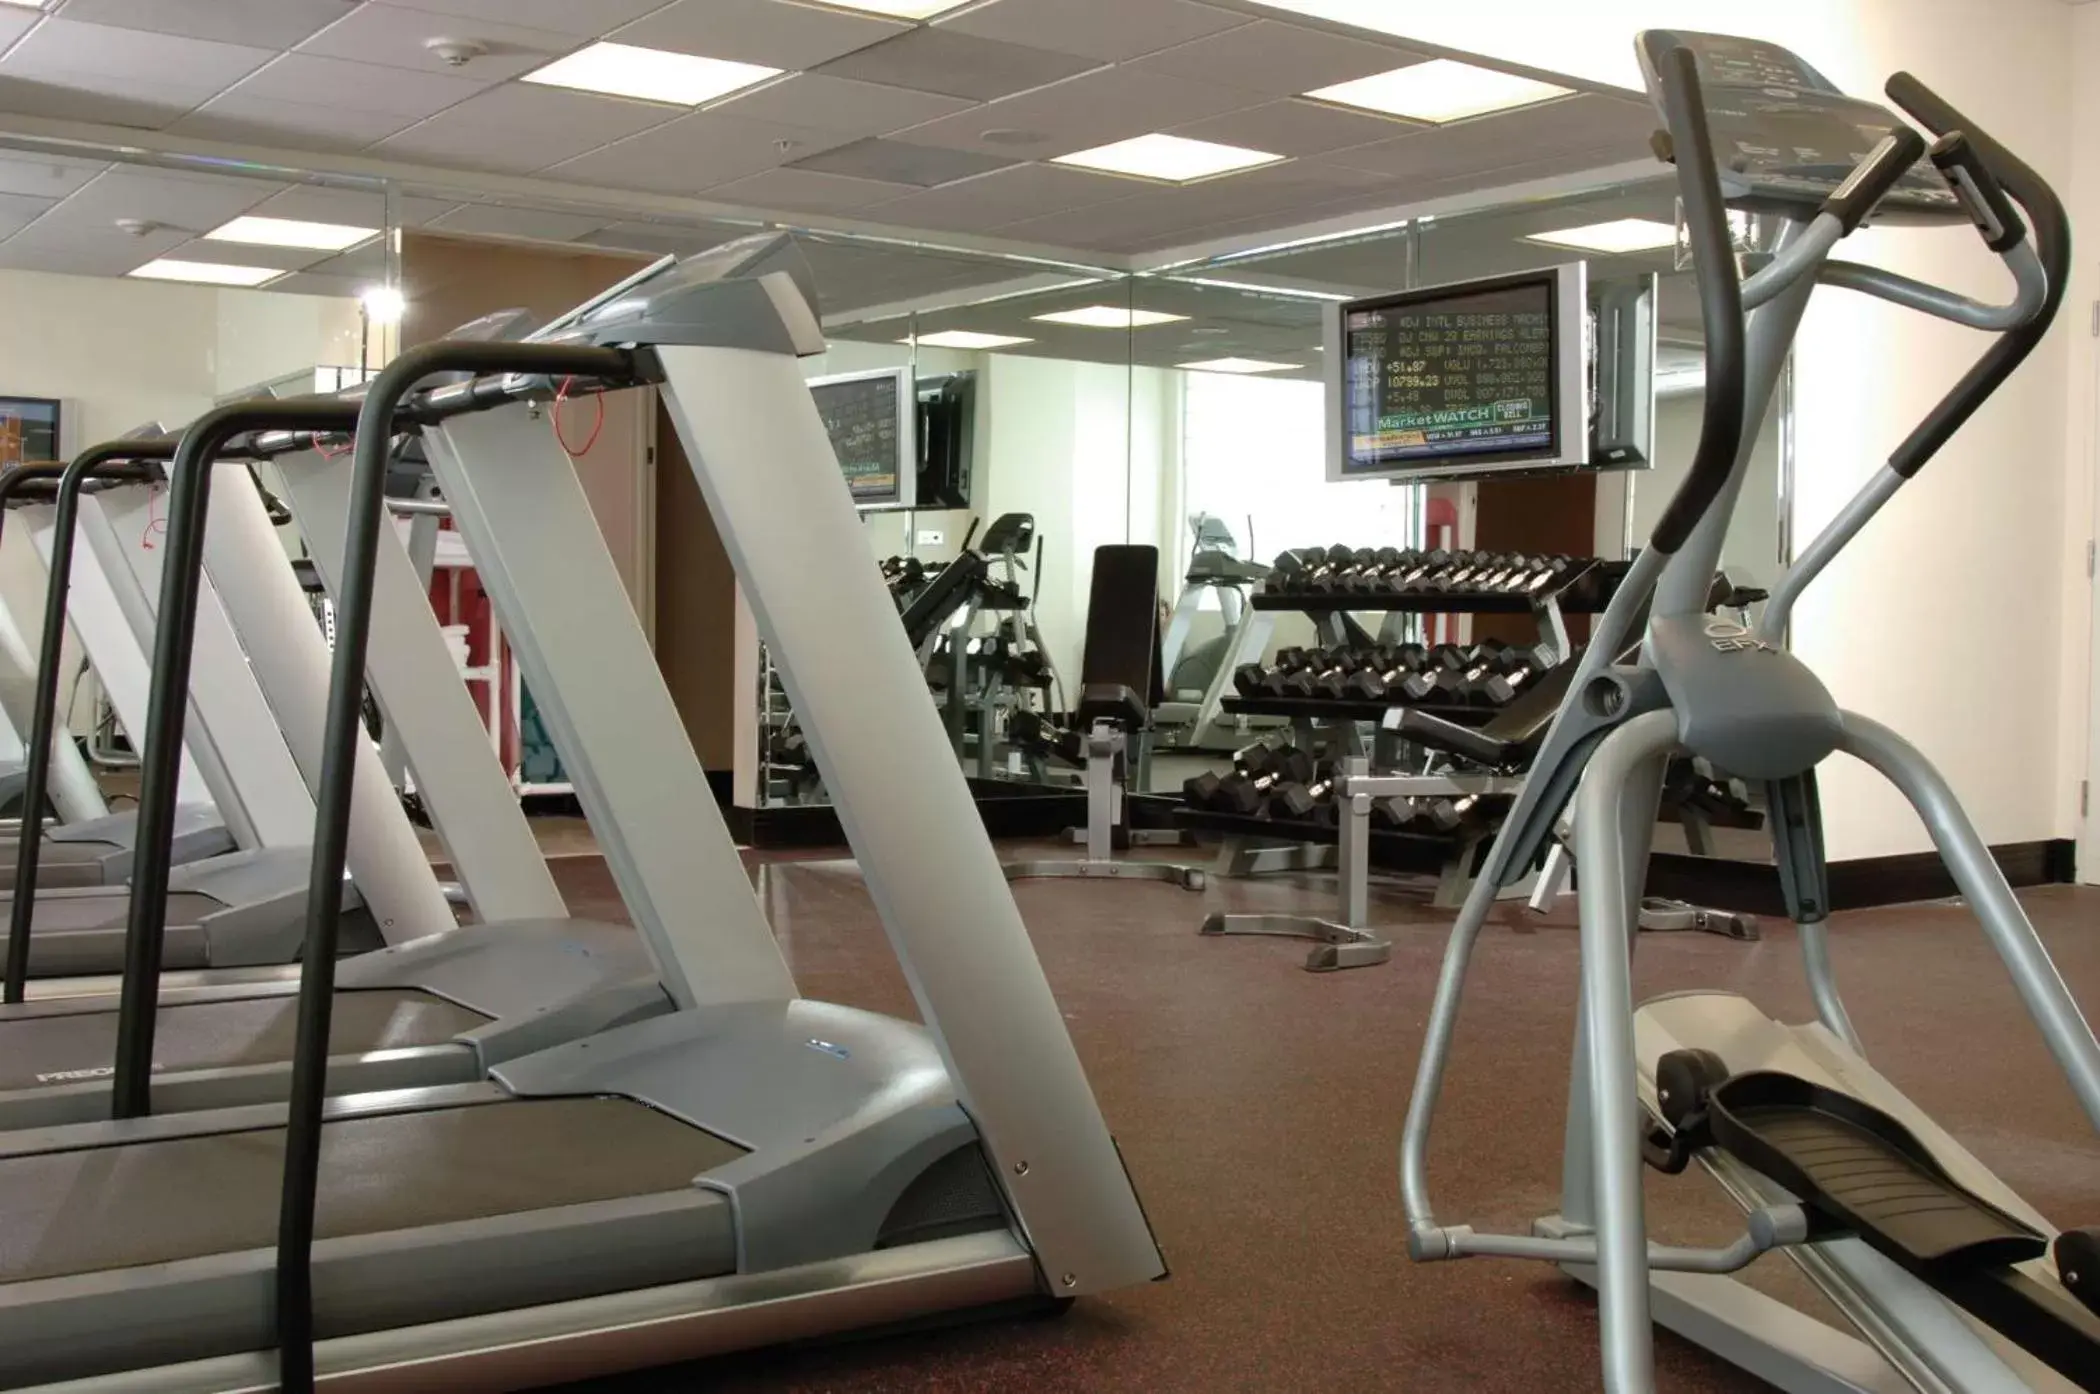 Fitness centre/facilities, Fitness Center/Facilities in GALLERYone - a DoubleTree Suites by Hilton Hotel